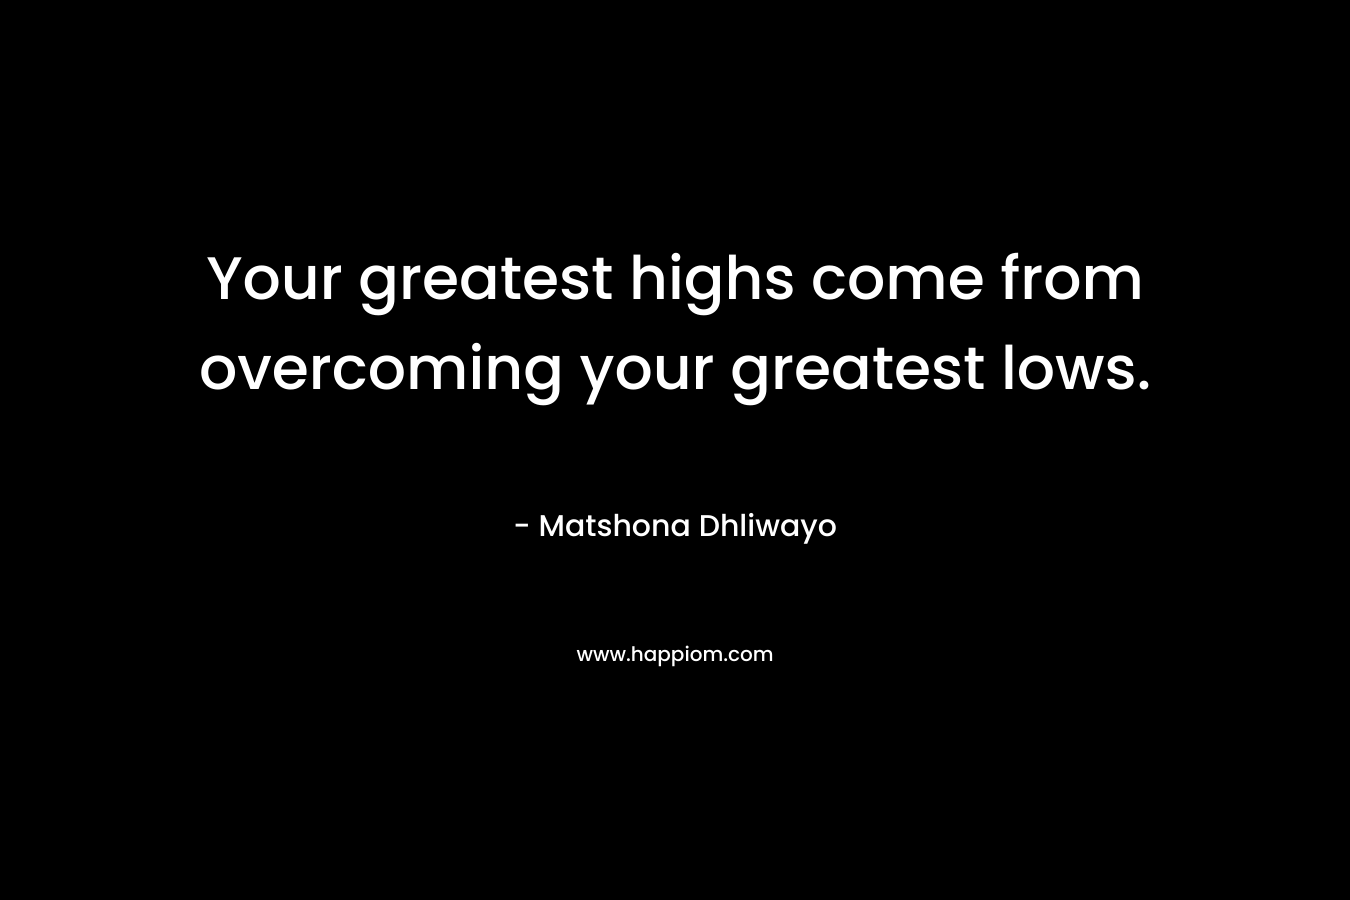 Your greatest highs come from overcoming your greatest lows. – Matshona Dhliwayo